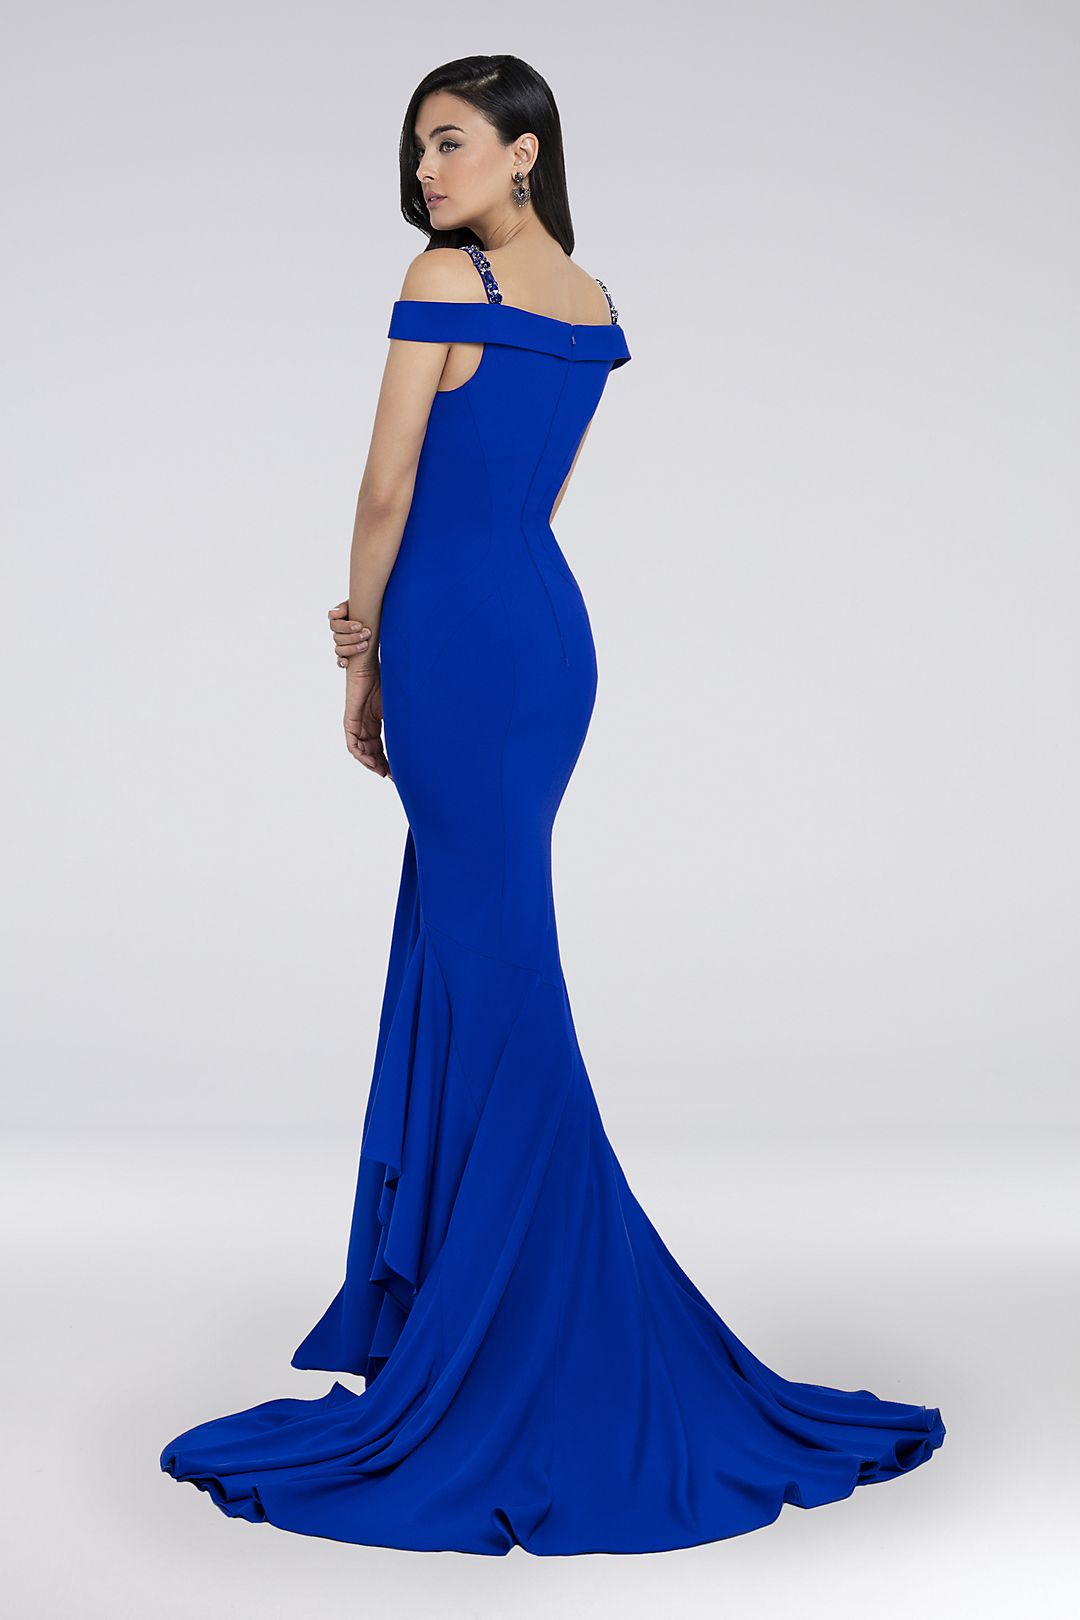 Beaded Strap Plunging Off-the-Shoulder Gown Image 2